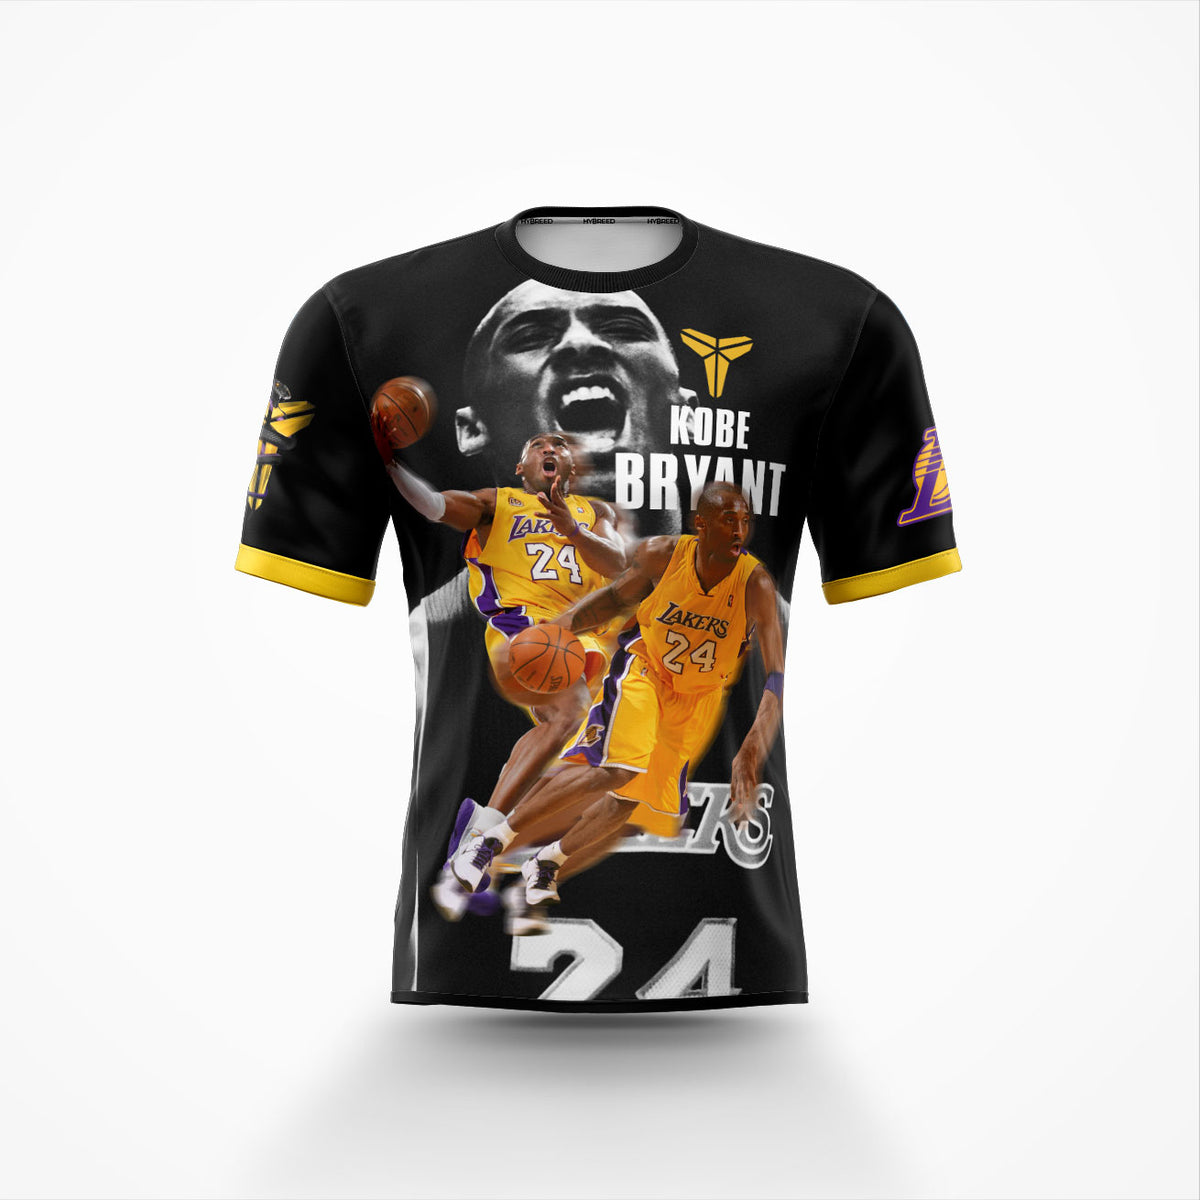 Kobe Bryant Full Sublimation Shirt Design 2 – Hybreed Apparel Collections